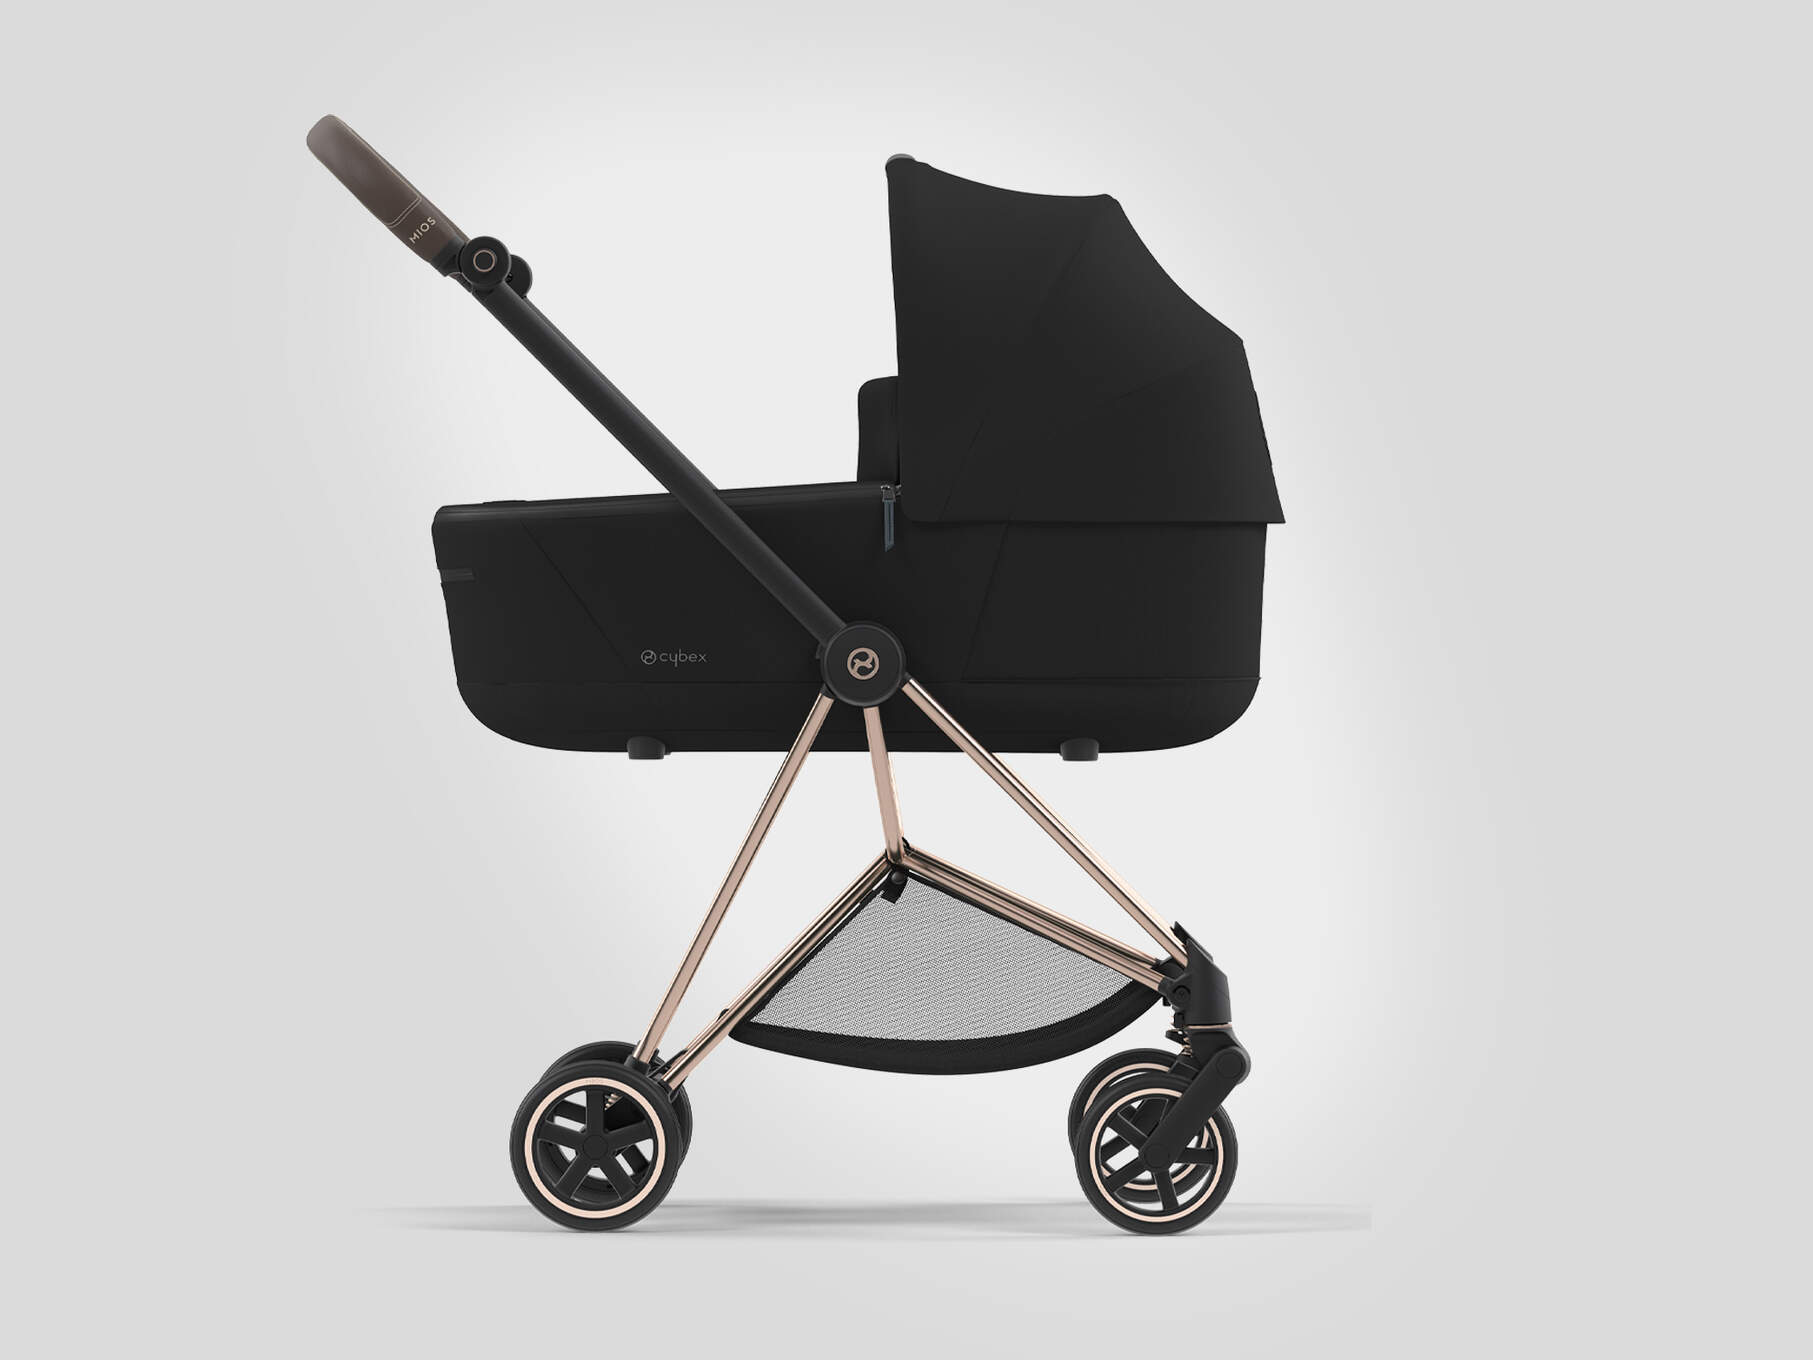 CYBEX Platinum Stroller Mios Lux Carry Cot shown on Mios Frame 